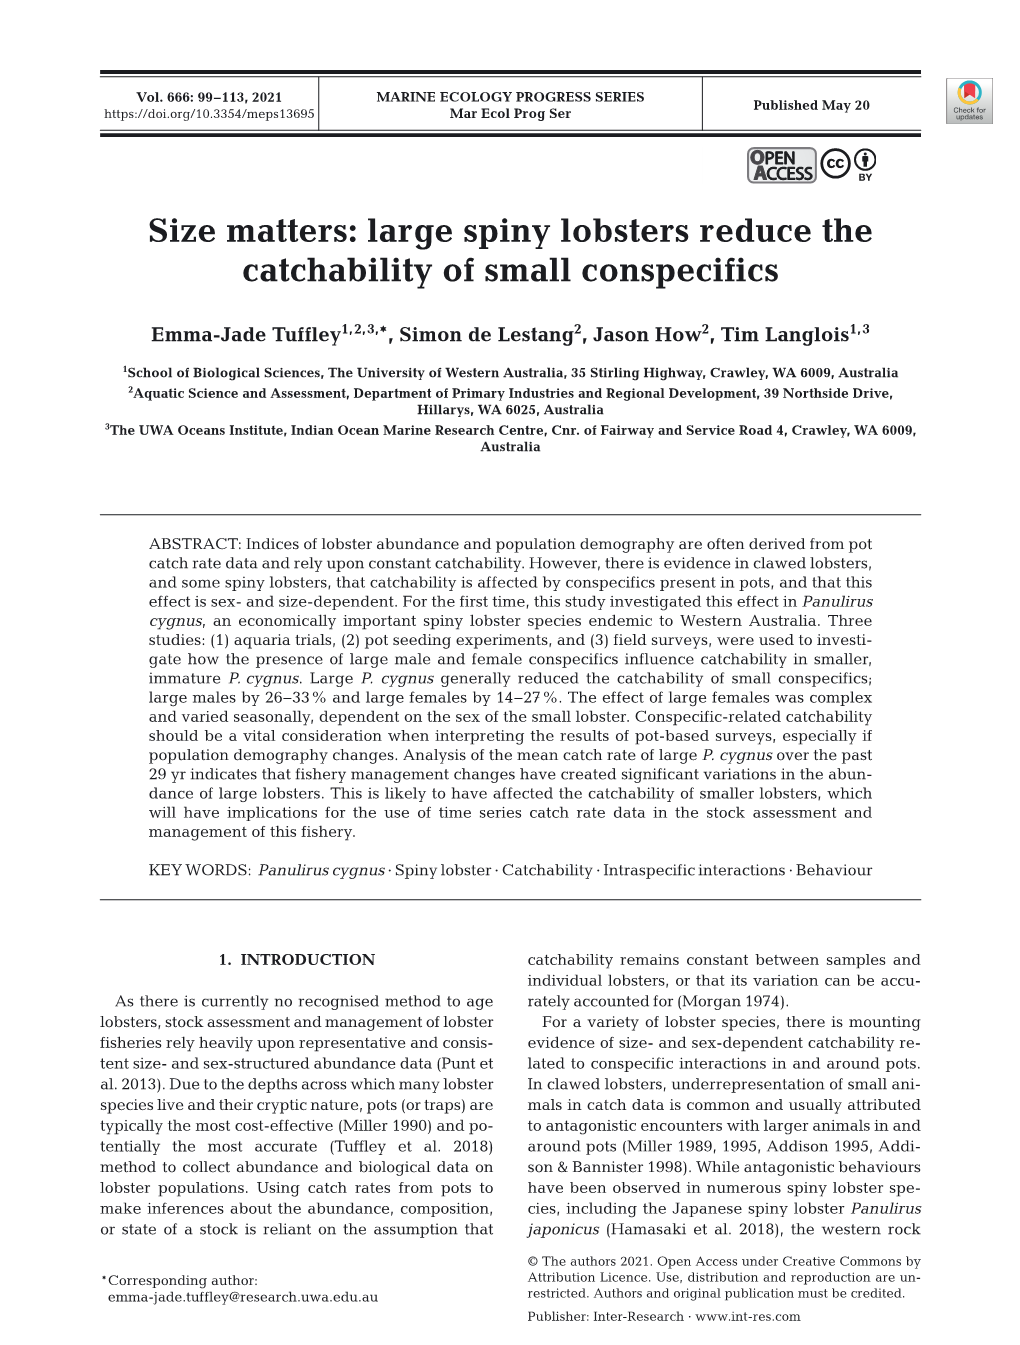 Large Spiny Lobsters Reduce the Catchability of Small Conspecifics